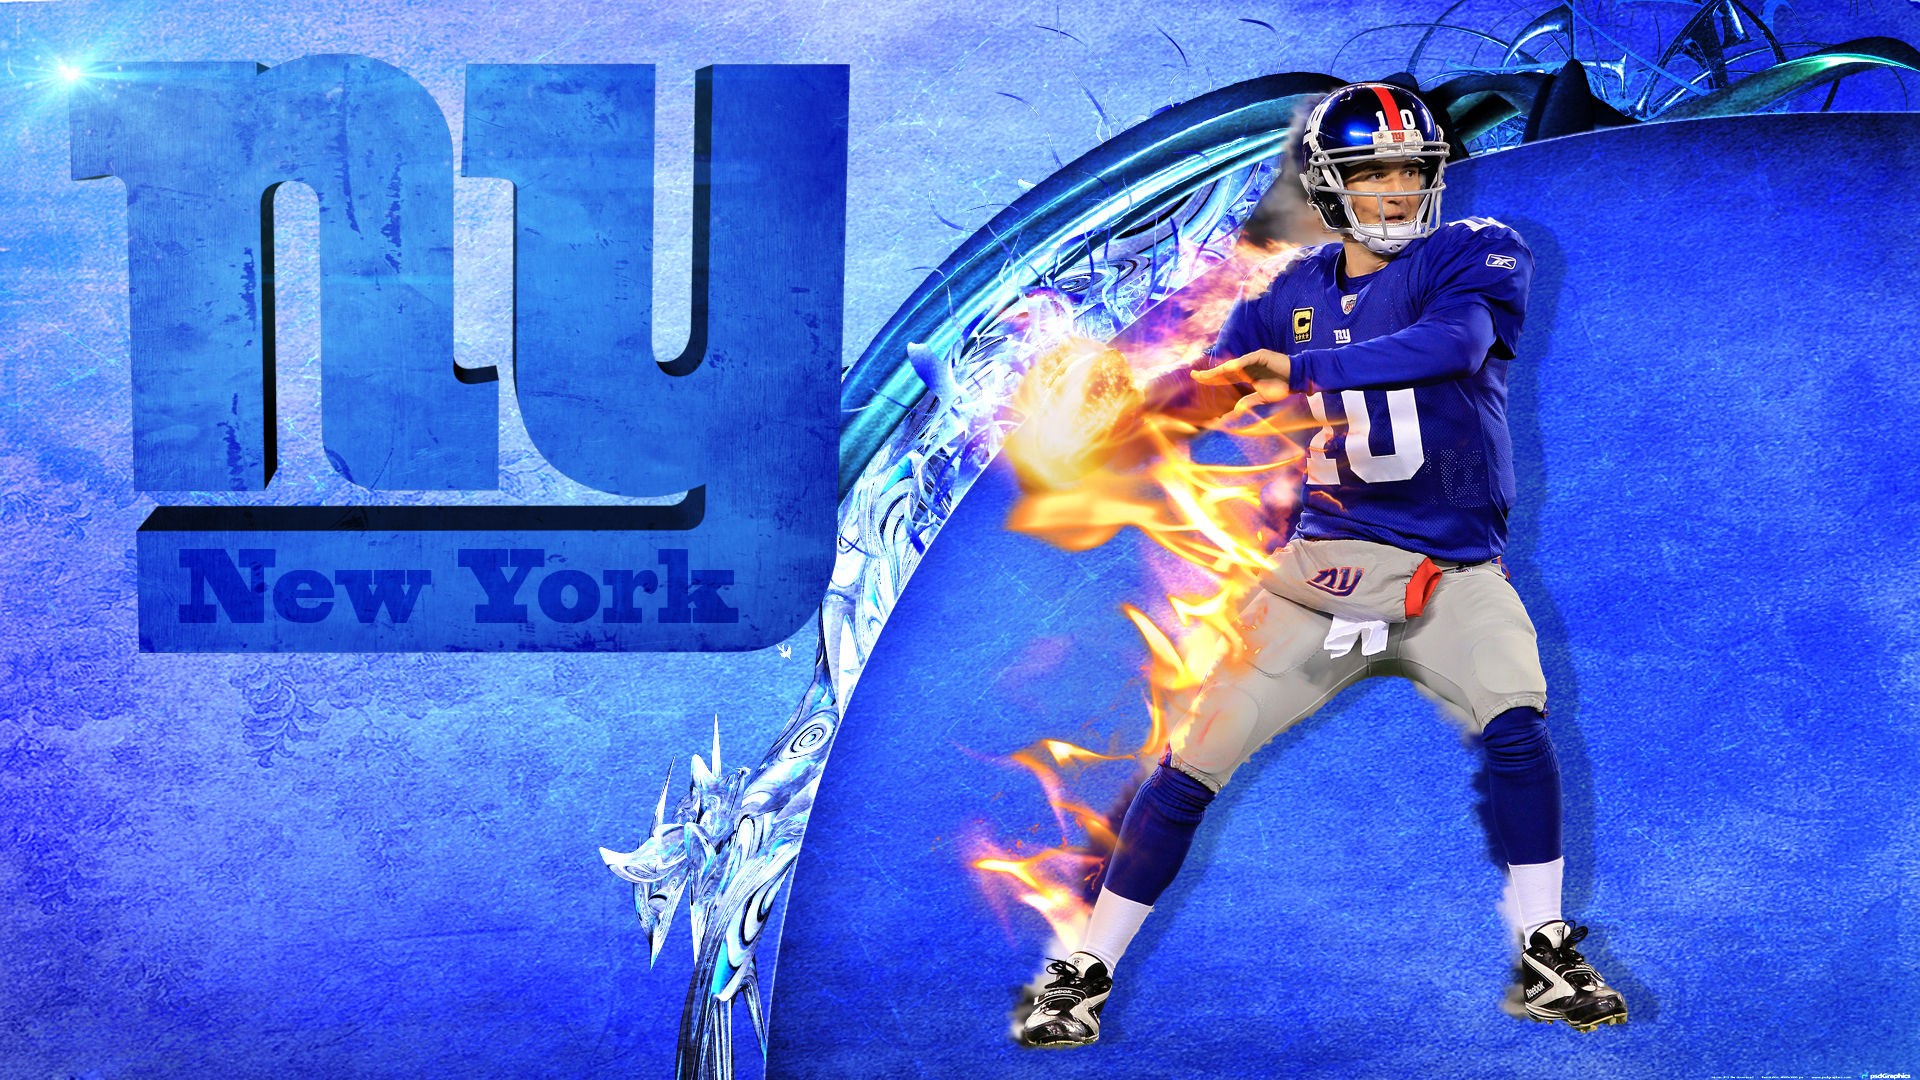 New York Giants NFL For Desktop Wallpaper with high-resolution 1920x1080 pixel. You can use this wallpaper for your Mac or Windows Desktop Background, iPhone, Android or Tablet and another Smartphone device